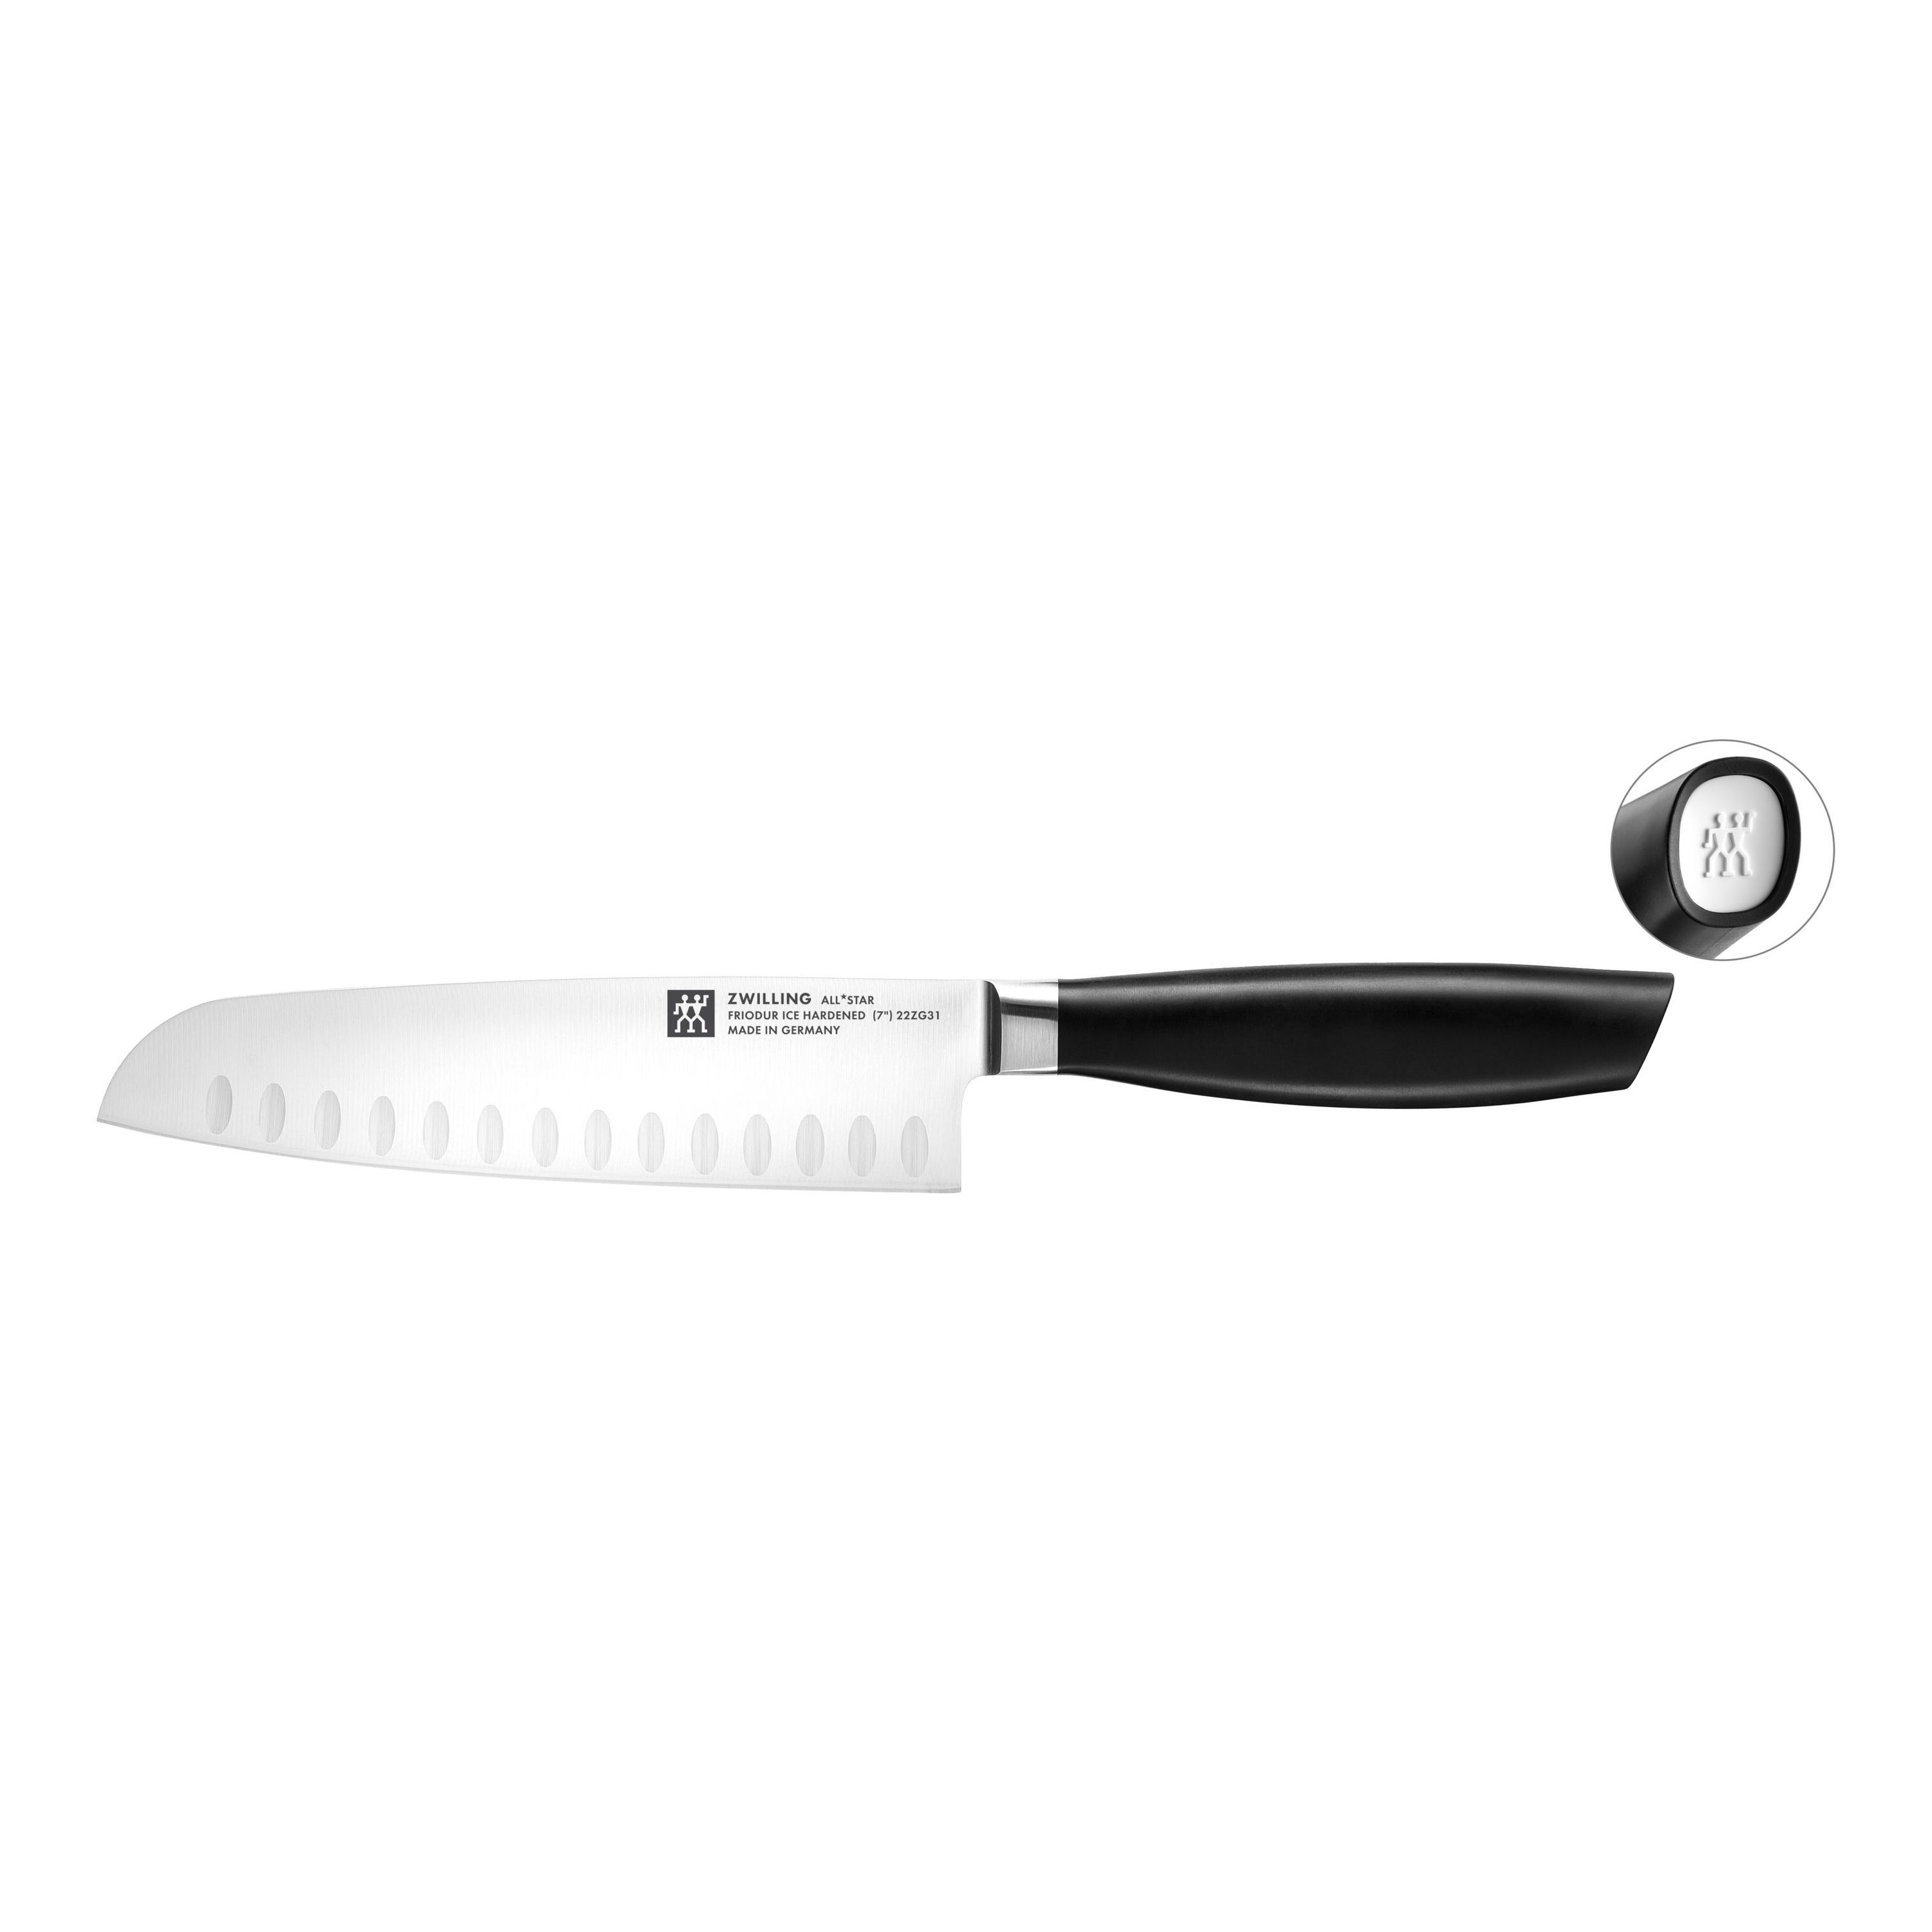 ZWILLING All * Star Couteau santoku 18 cm, Blanc